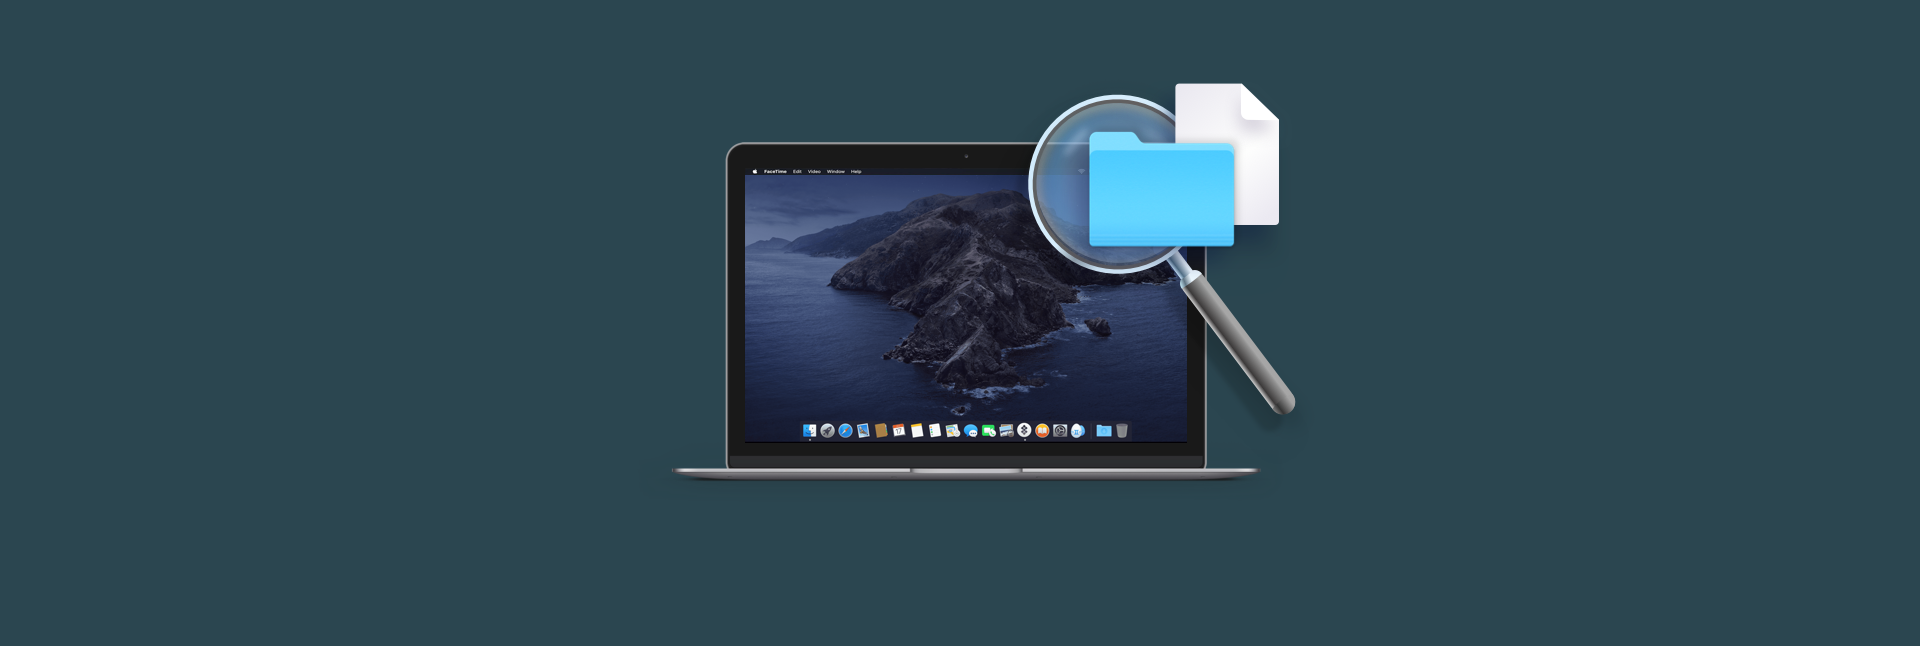 search for a specific word in imessage on mac